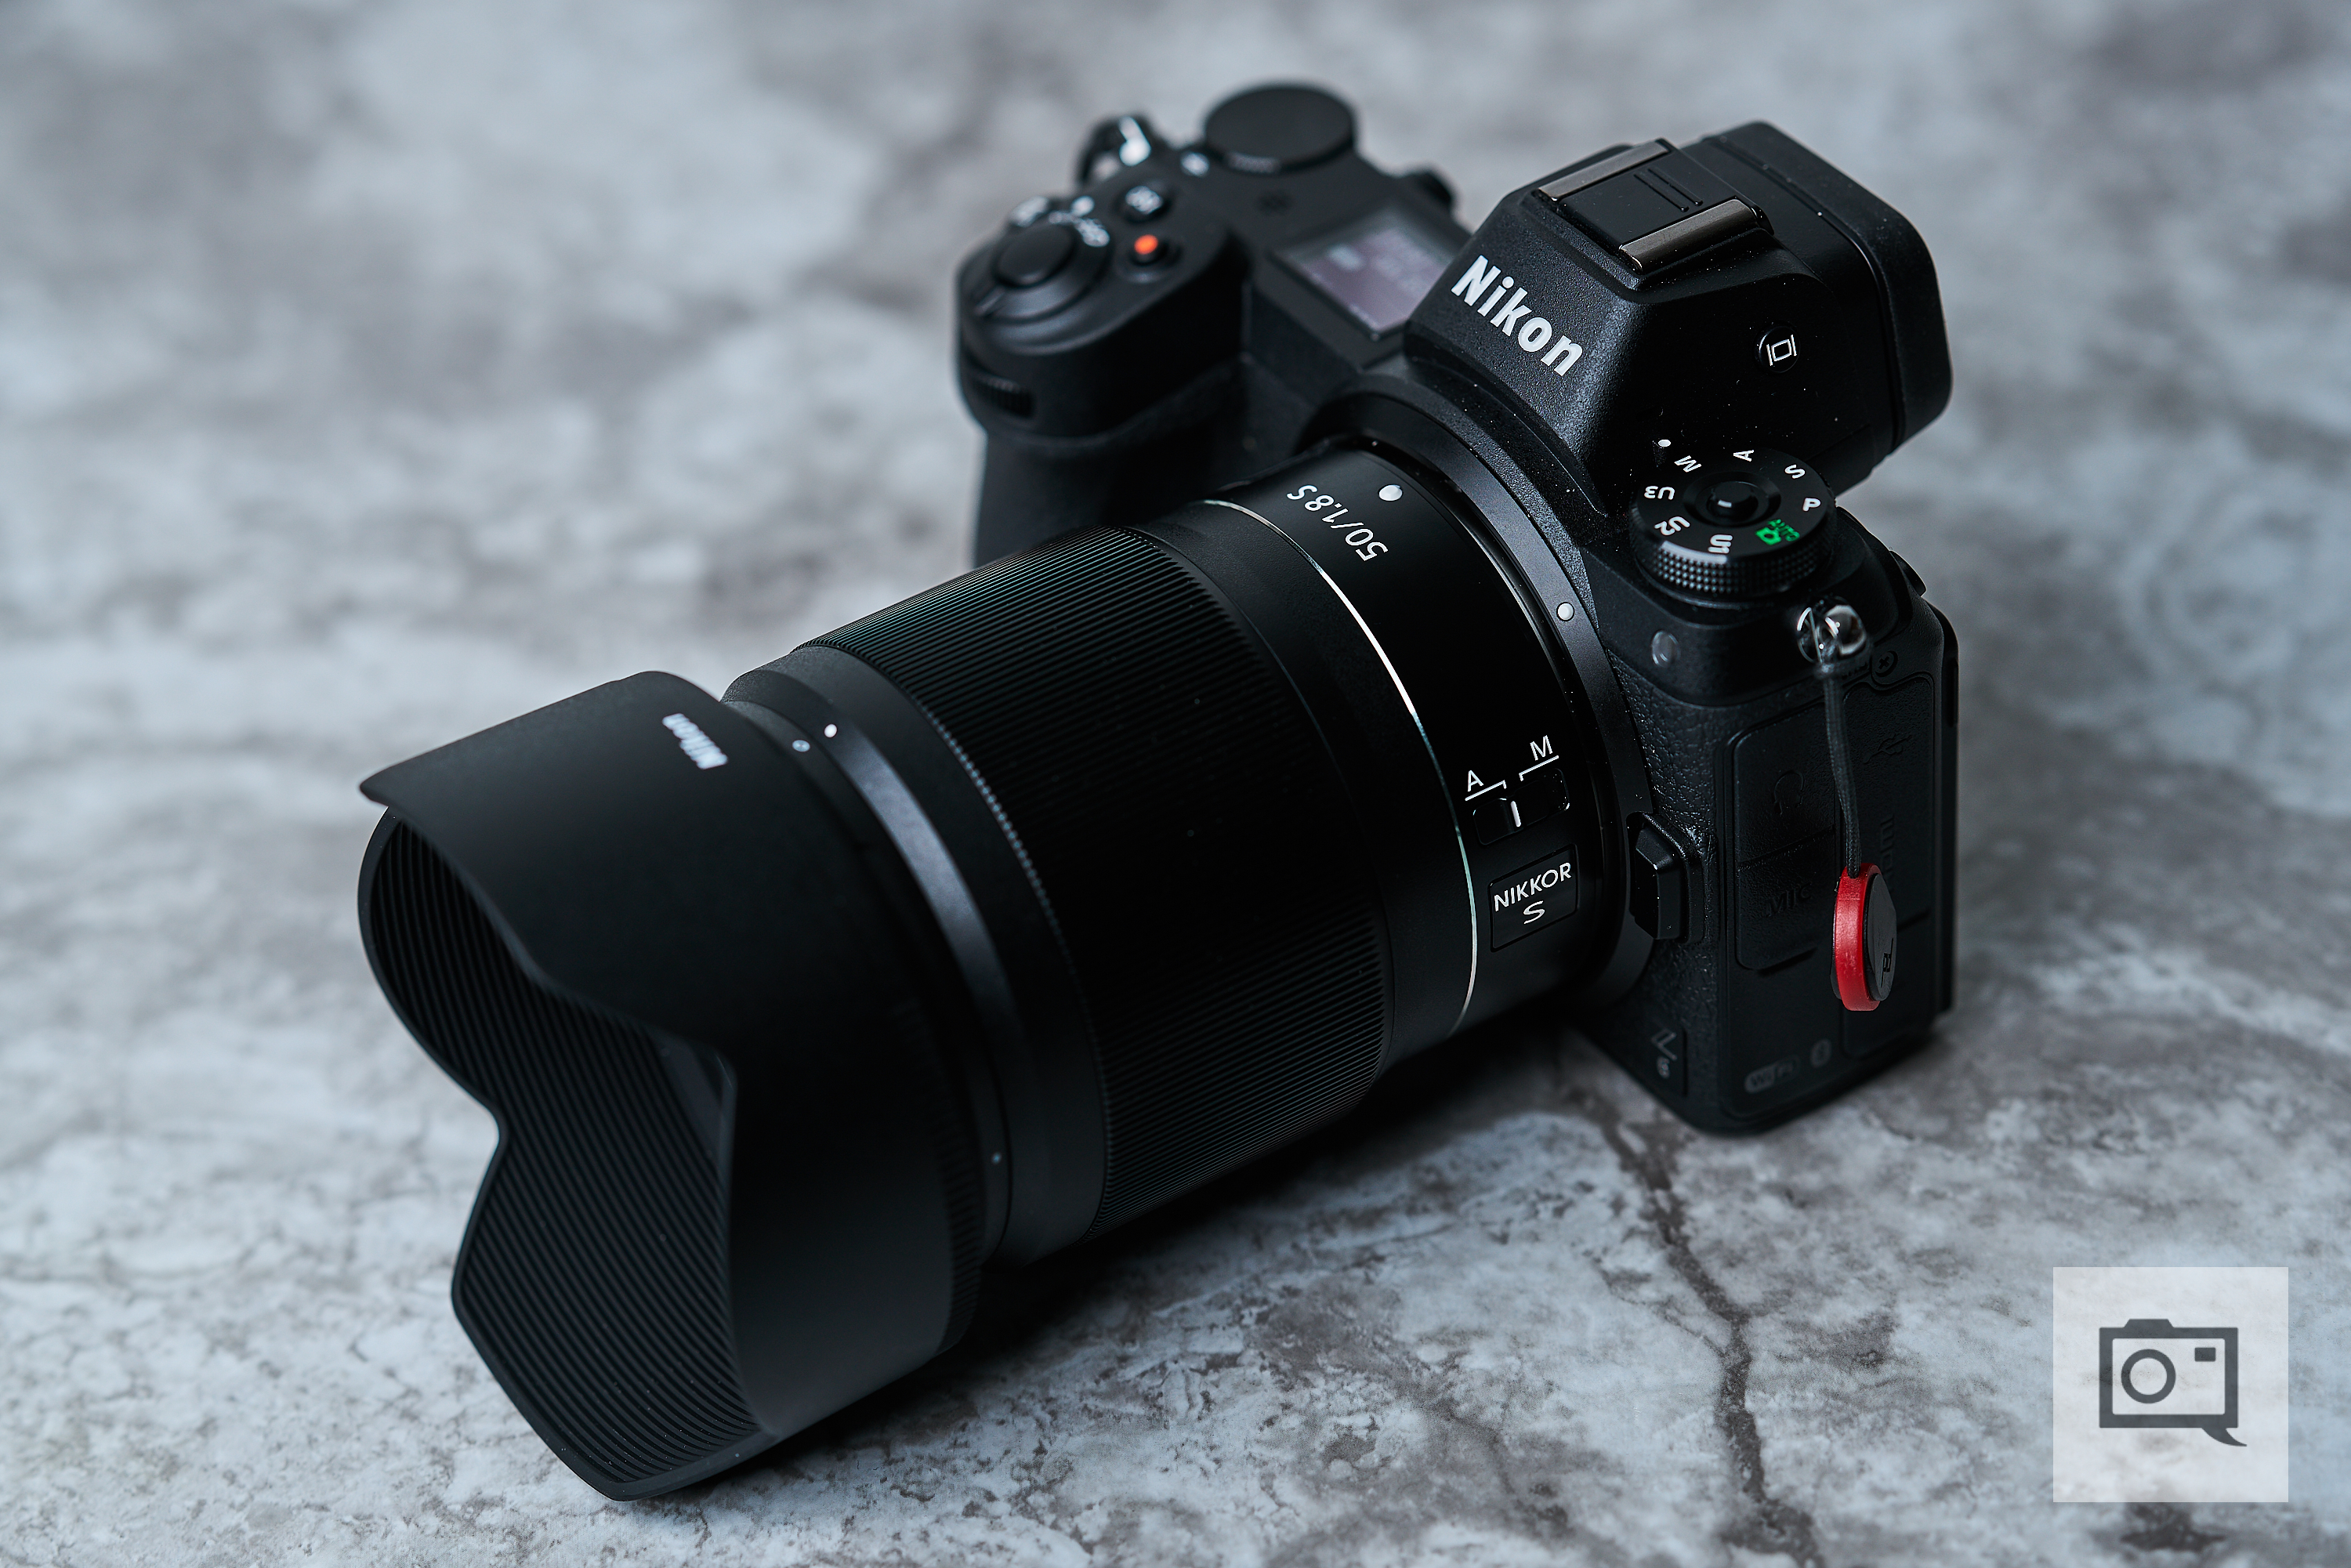 Review: Nikon Z6 (The Better of Nikon’s Two Initial Mirrorless Cameras)